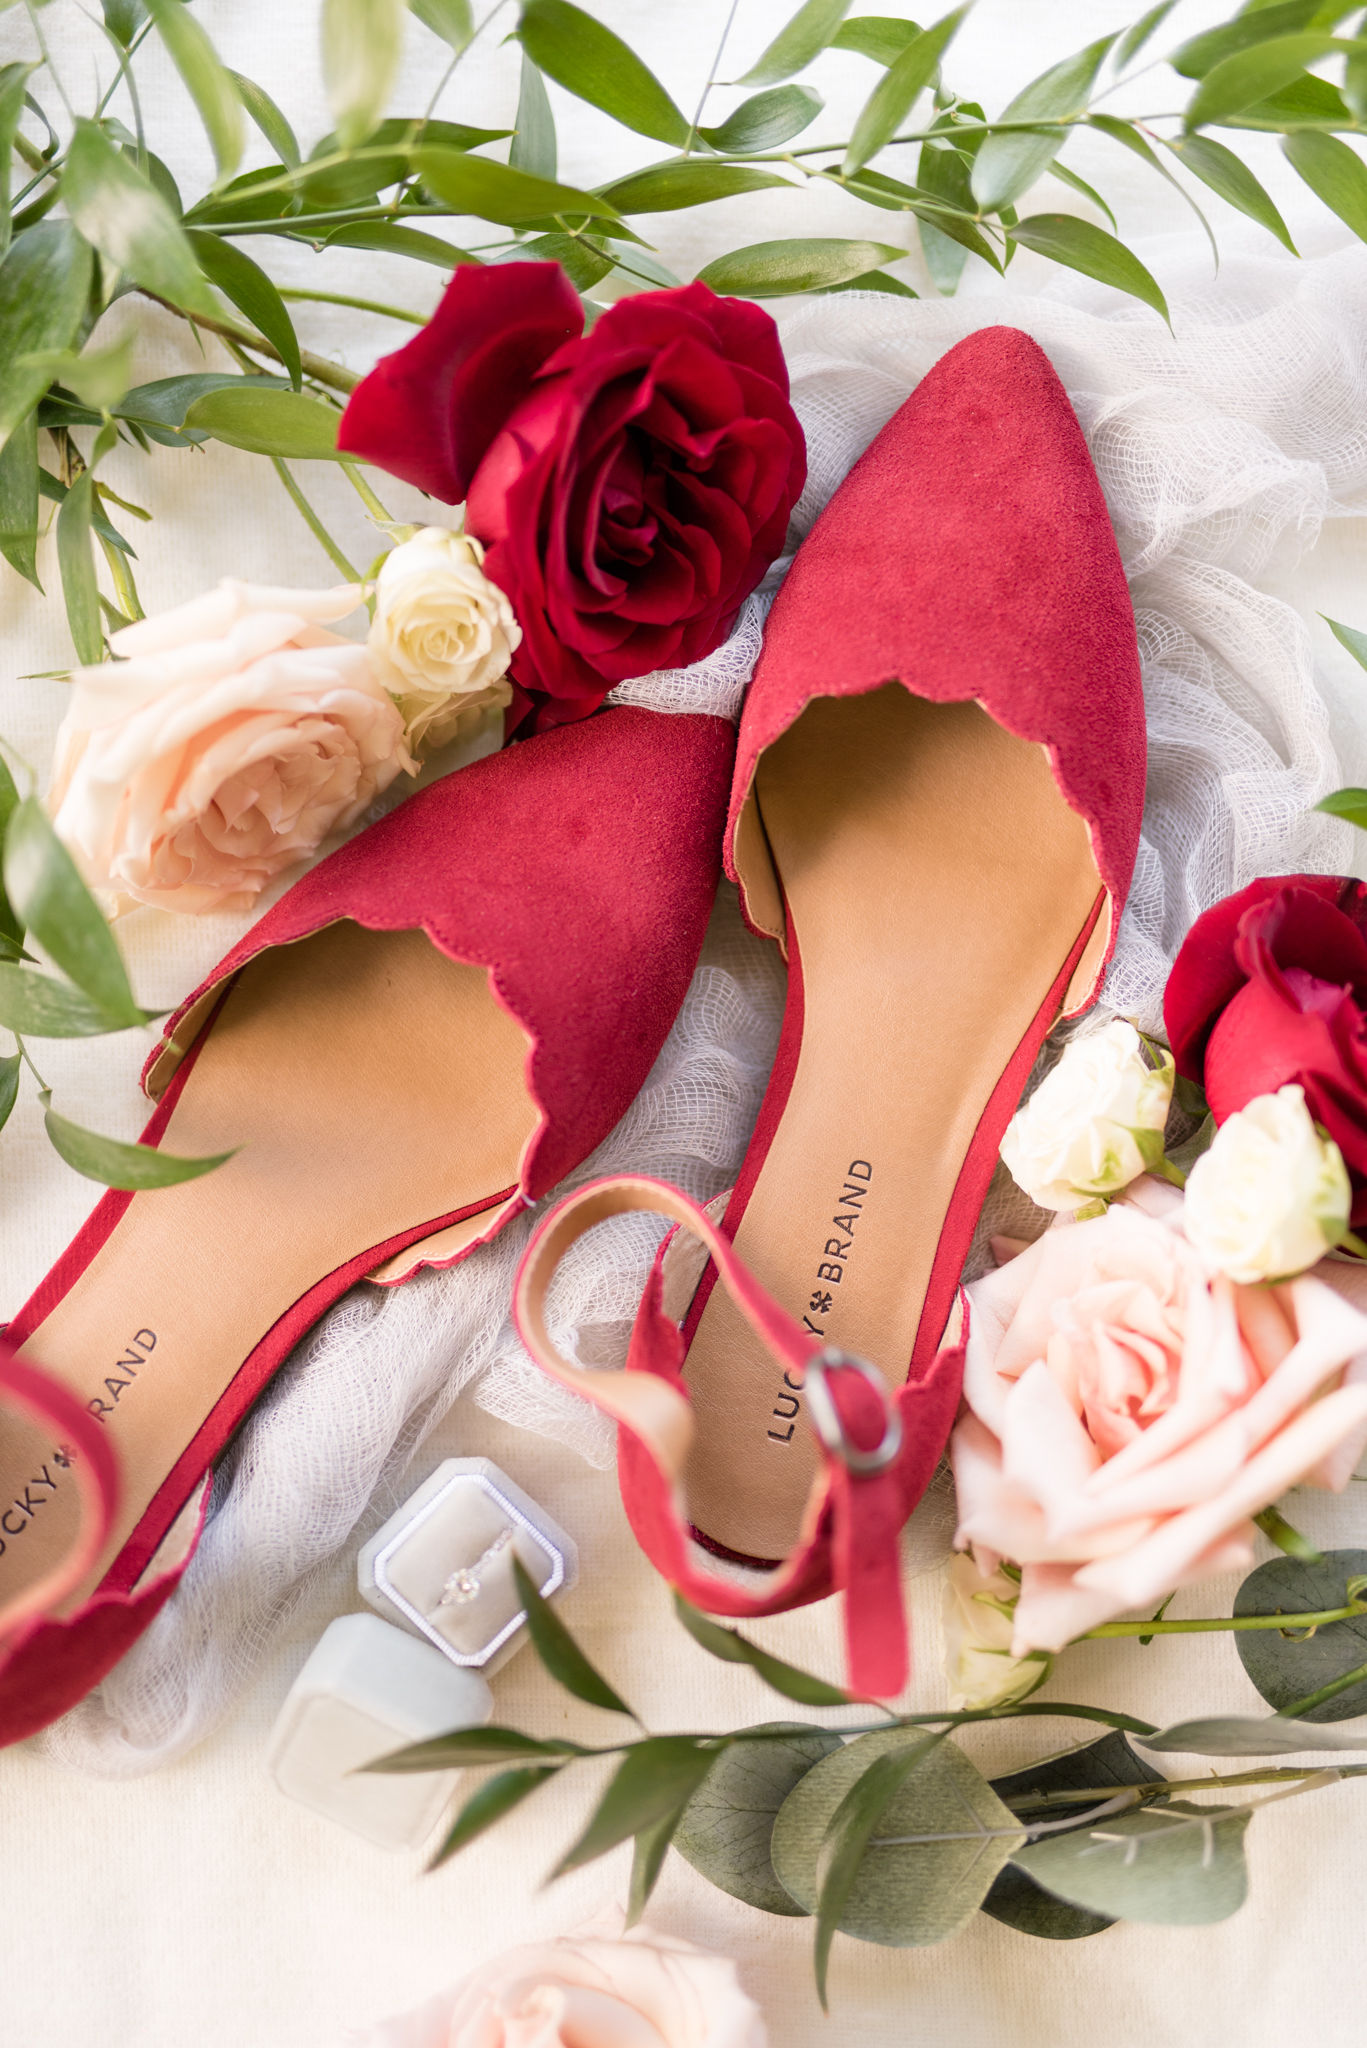 Bridal shoes and details sit among flowers.